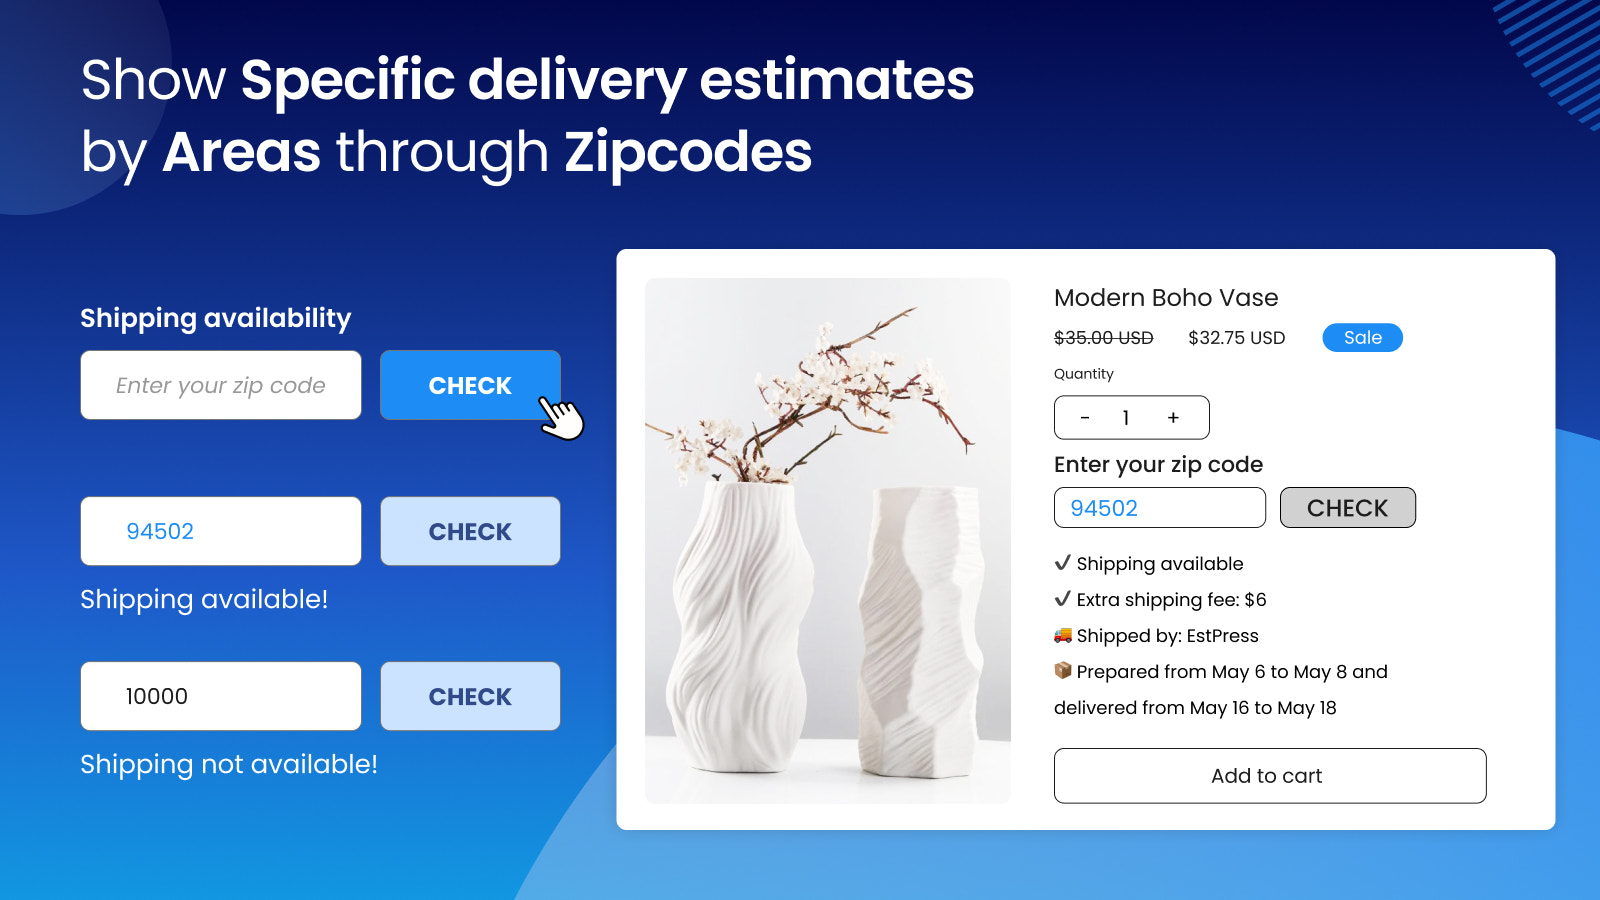 Show specific estimated delivery message by zip code